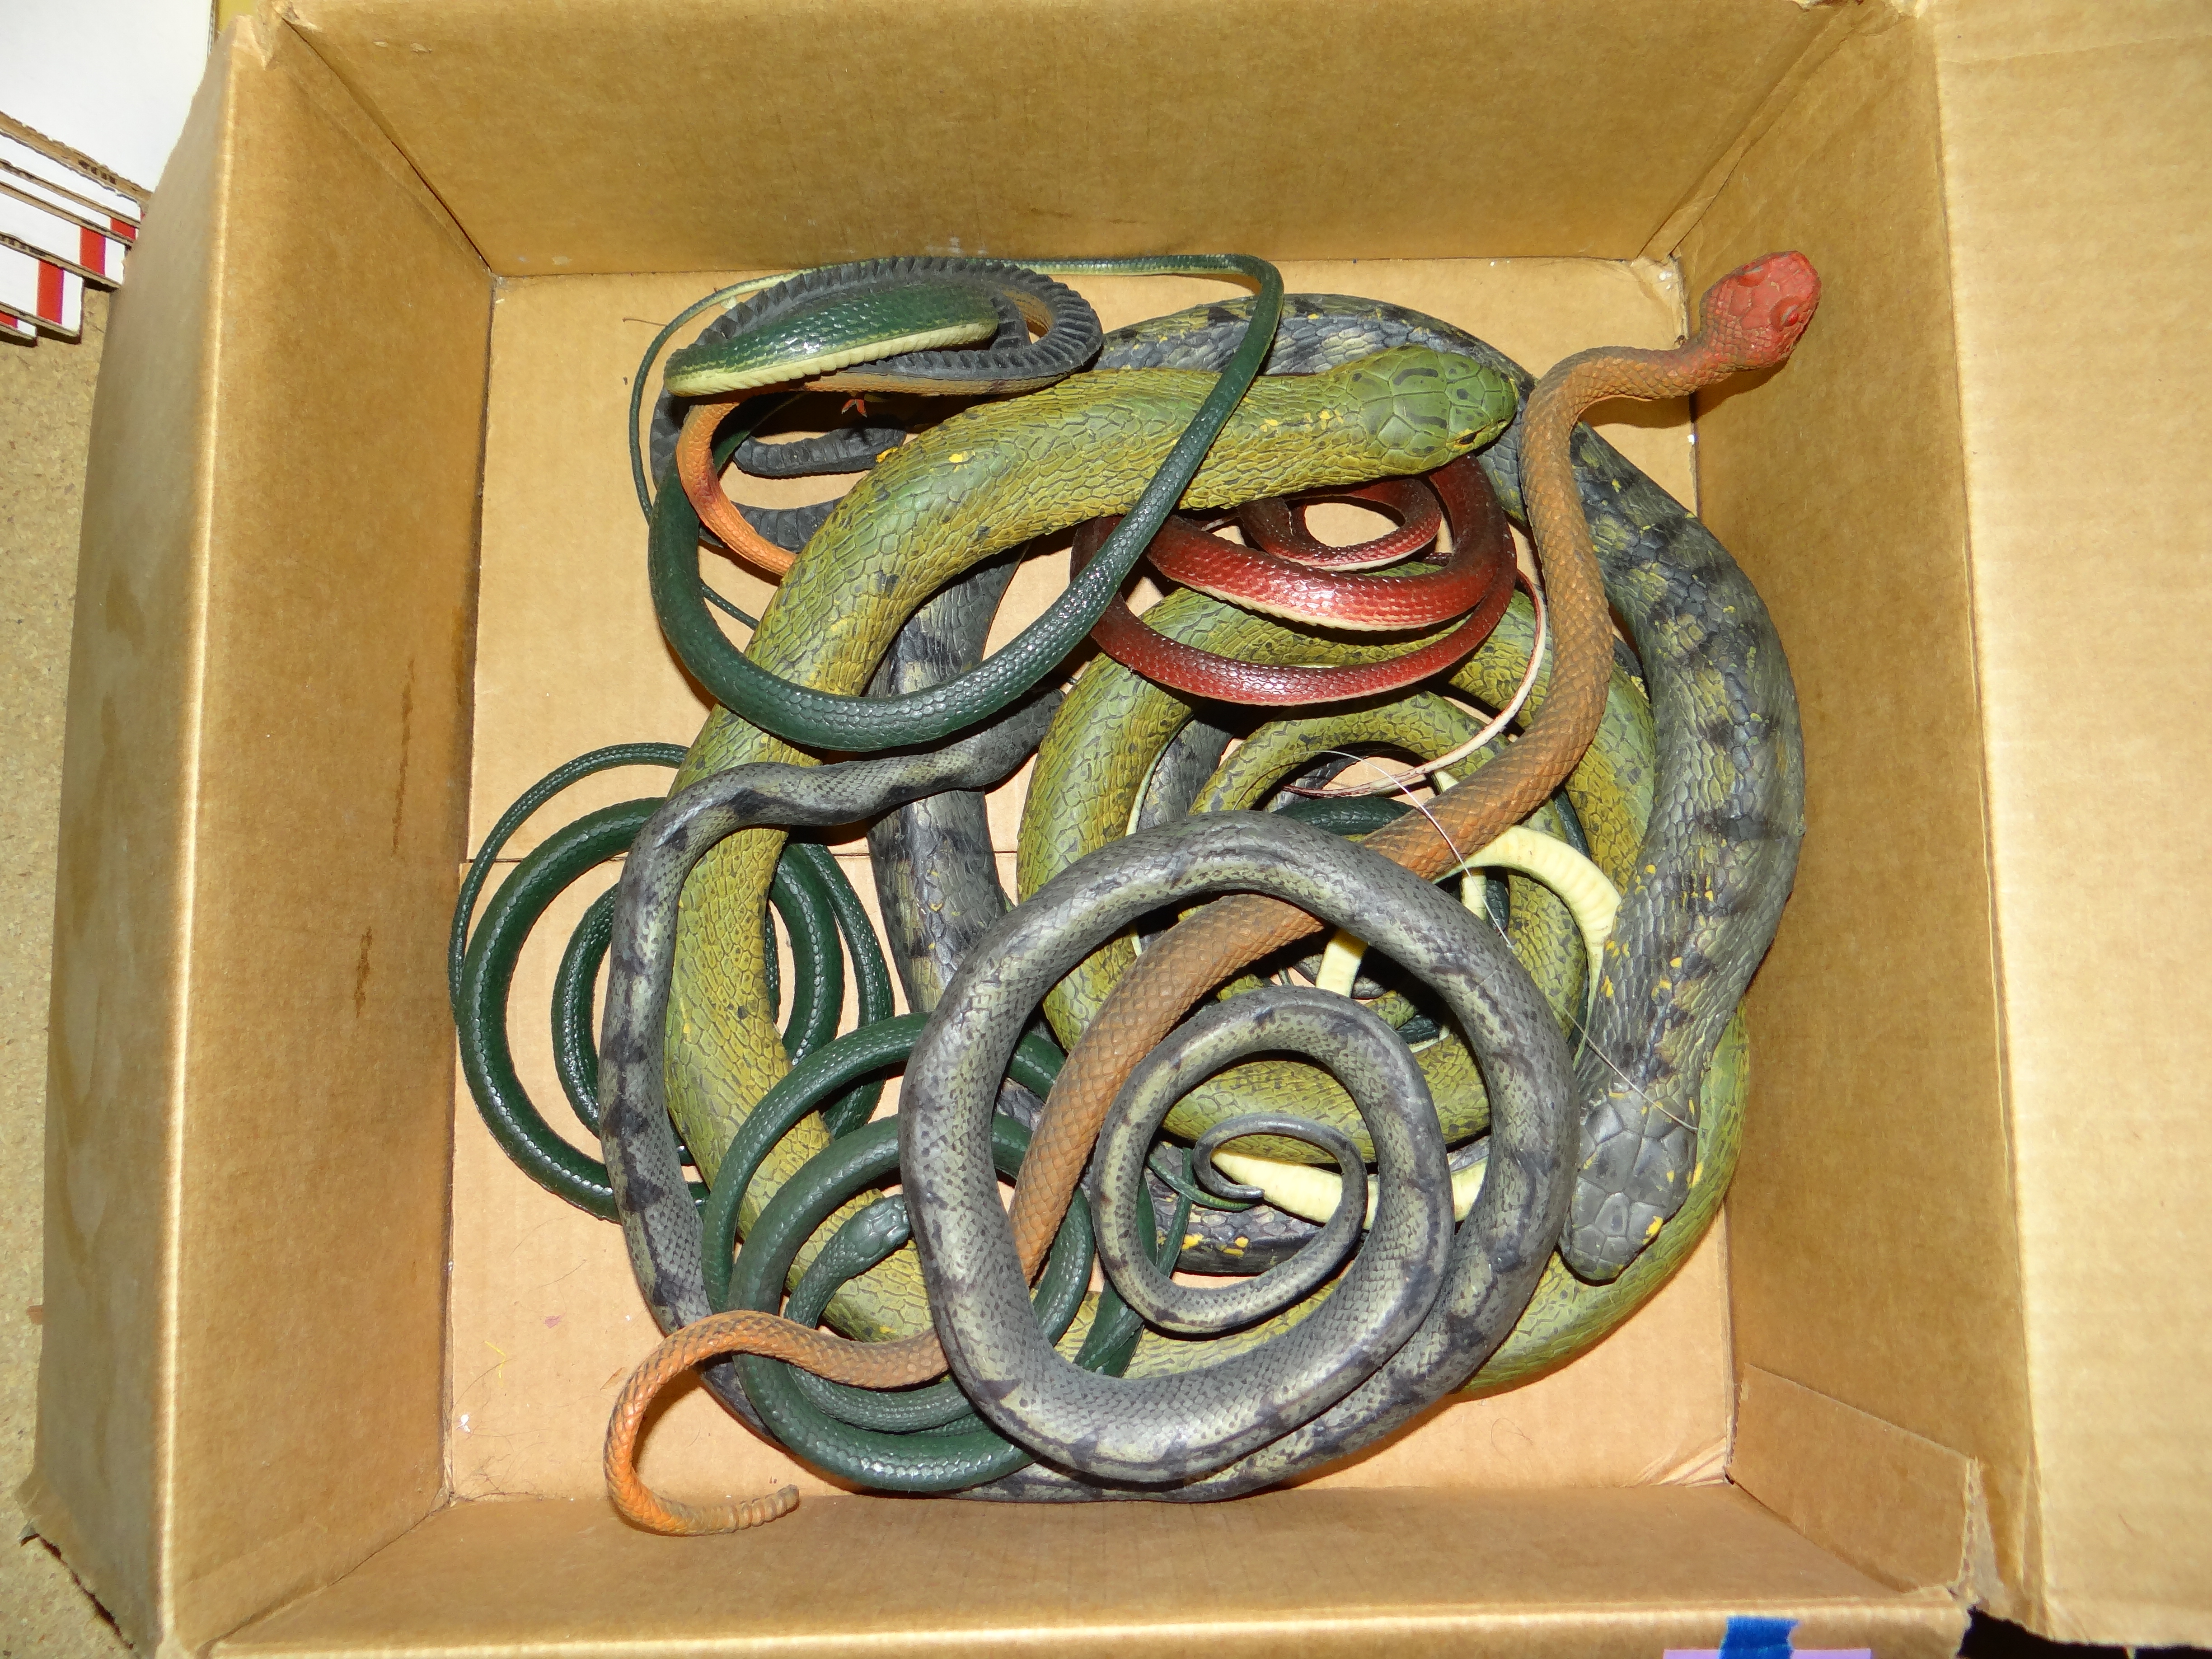 25-Box of Rubber Snakes